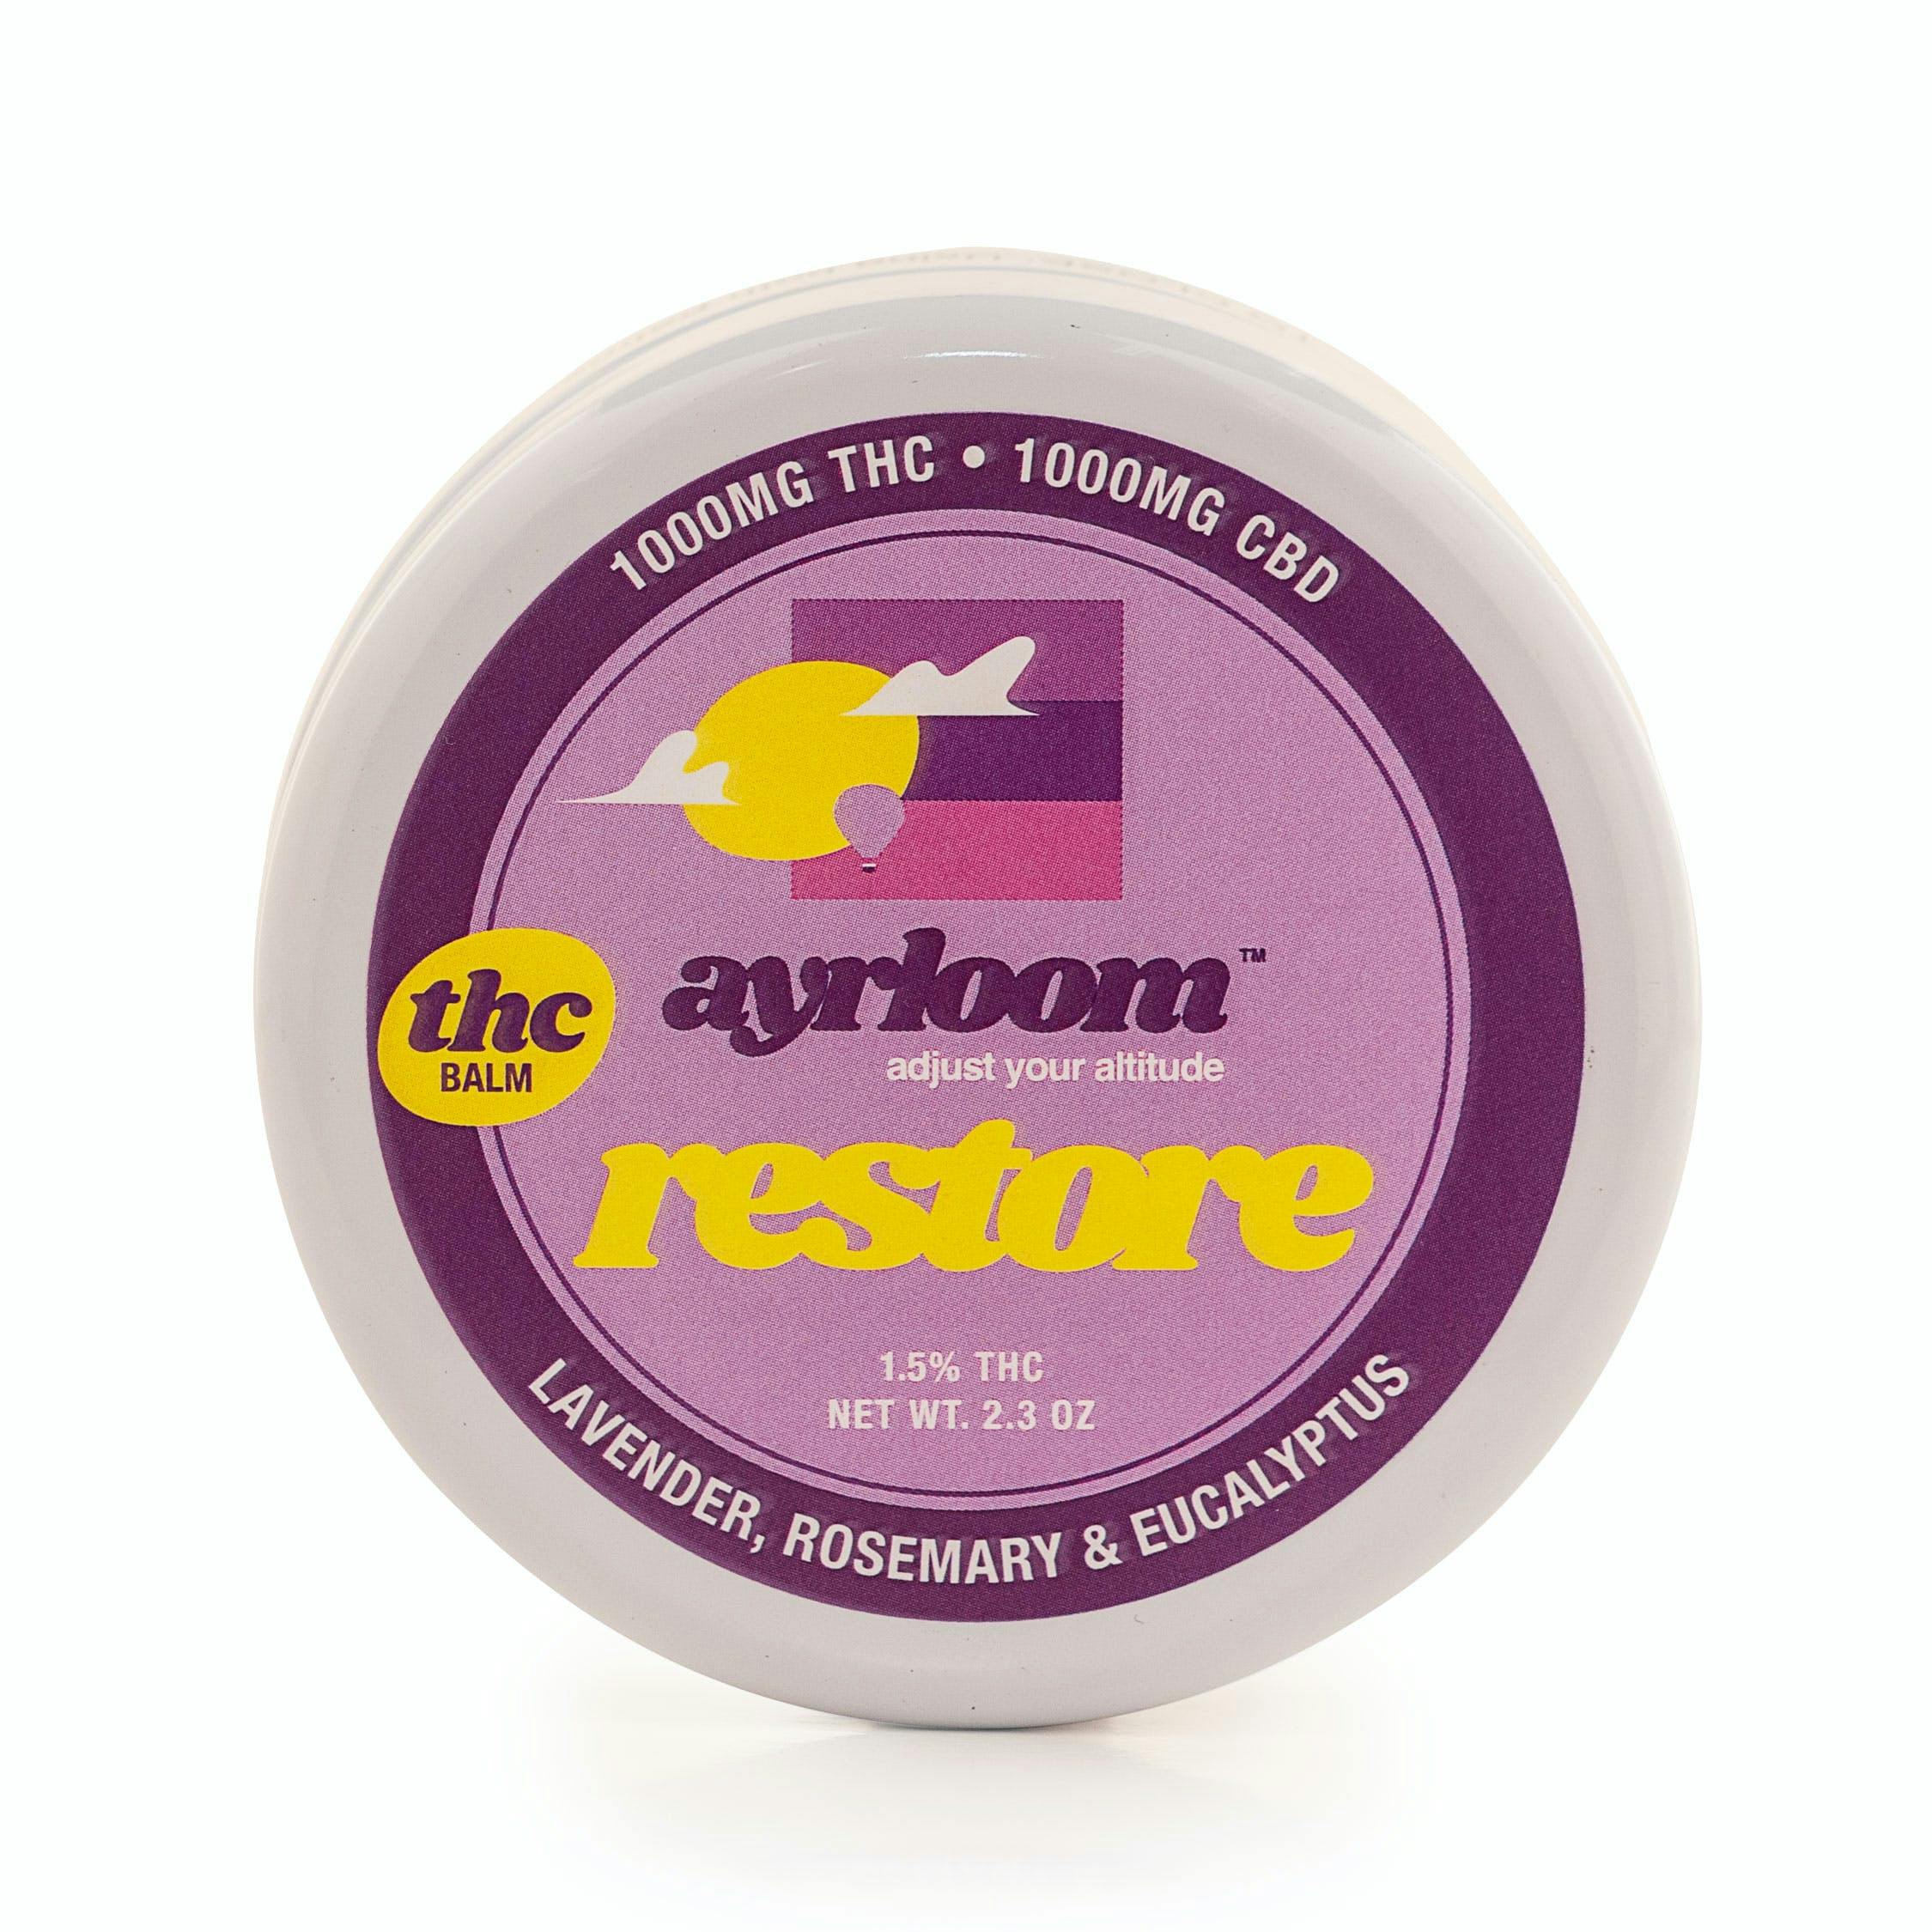 Restore • Balm - ayrloom - TOPICALS - Rockland County Weed Delivery | Treehouse Cannabis